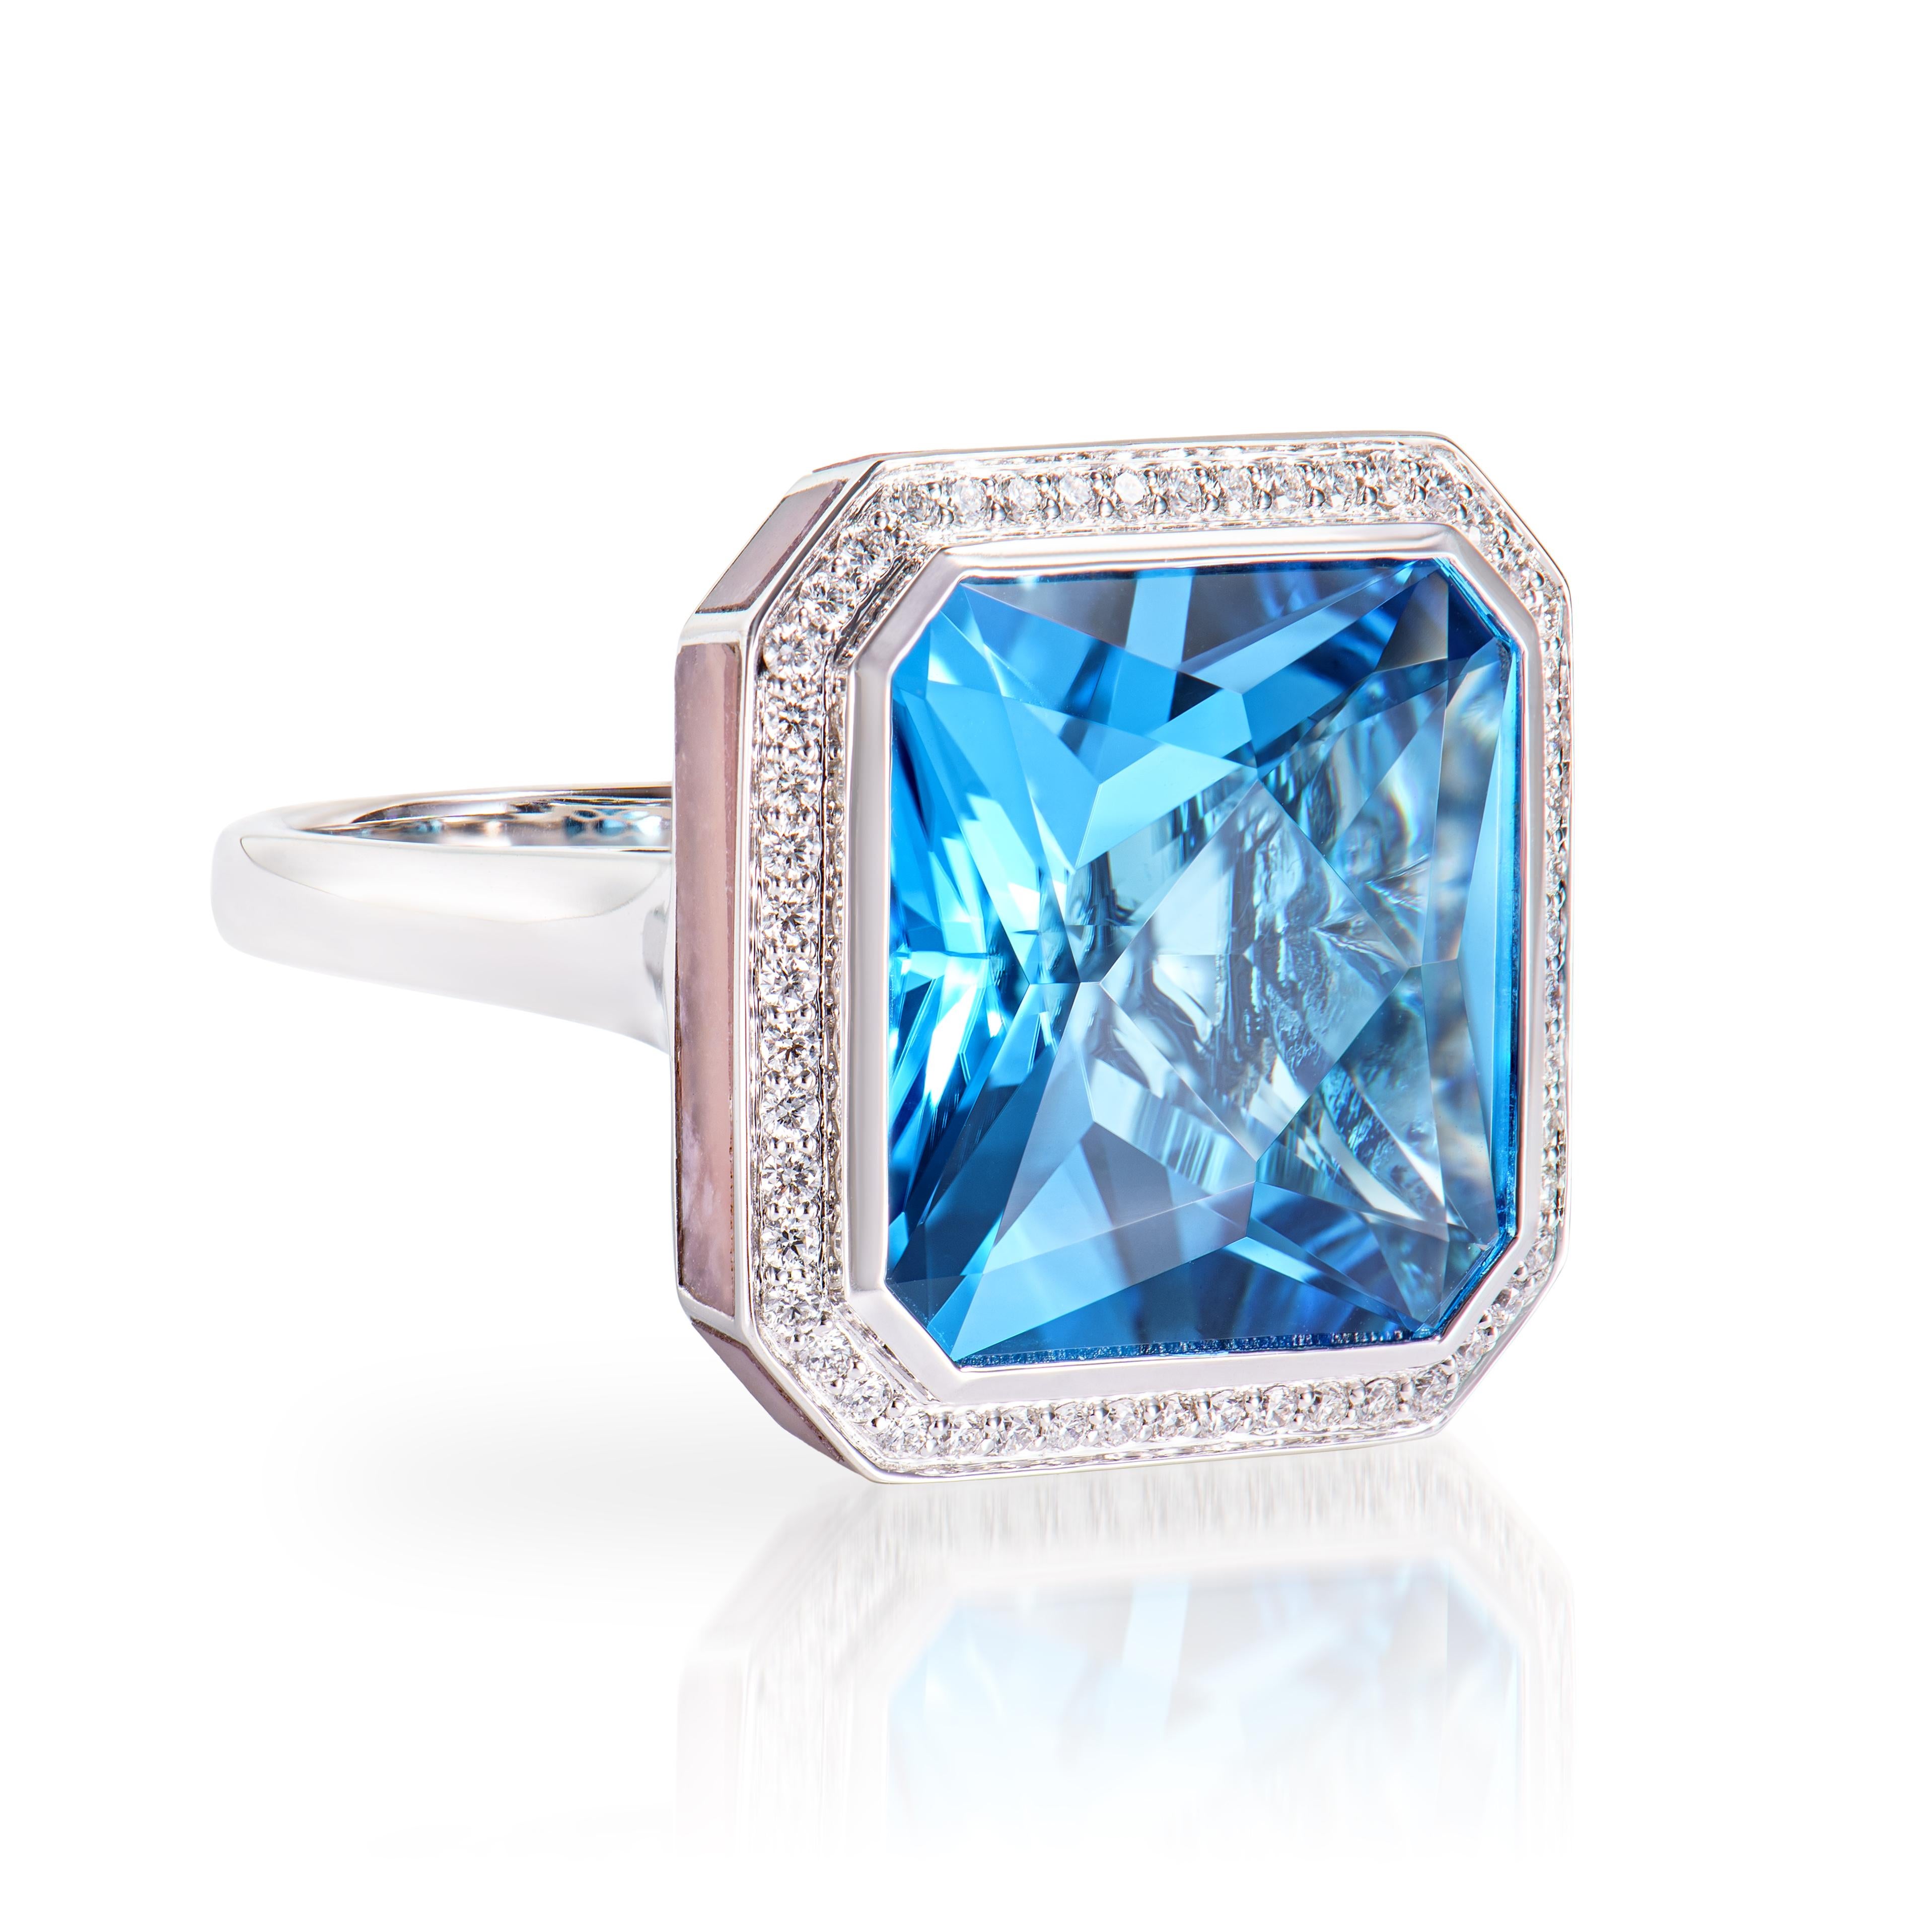 This lovely Swiss Blue Topaz ring is set in an octagon shape. The Pink Opal that embraces the ring's border adds to its beauty and elegance. This trendy ring is suitable for any event or gathering. These gemstones with diamonds are set in white gold